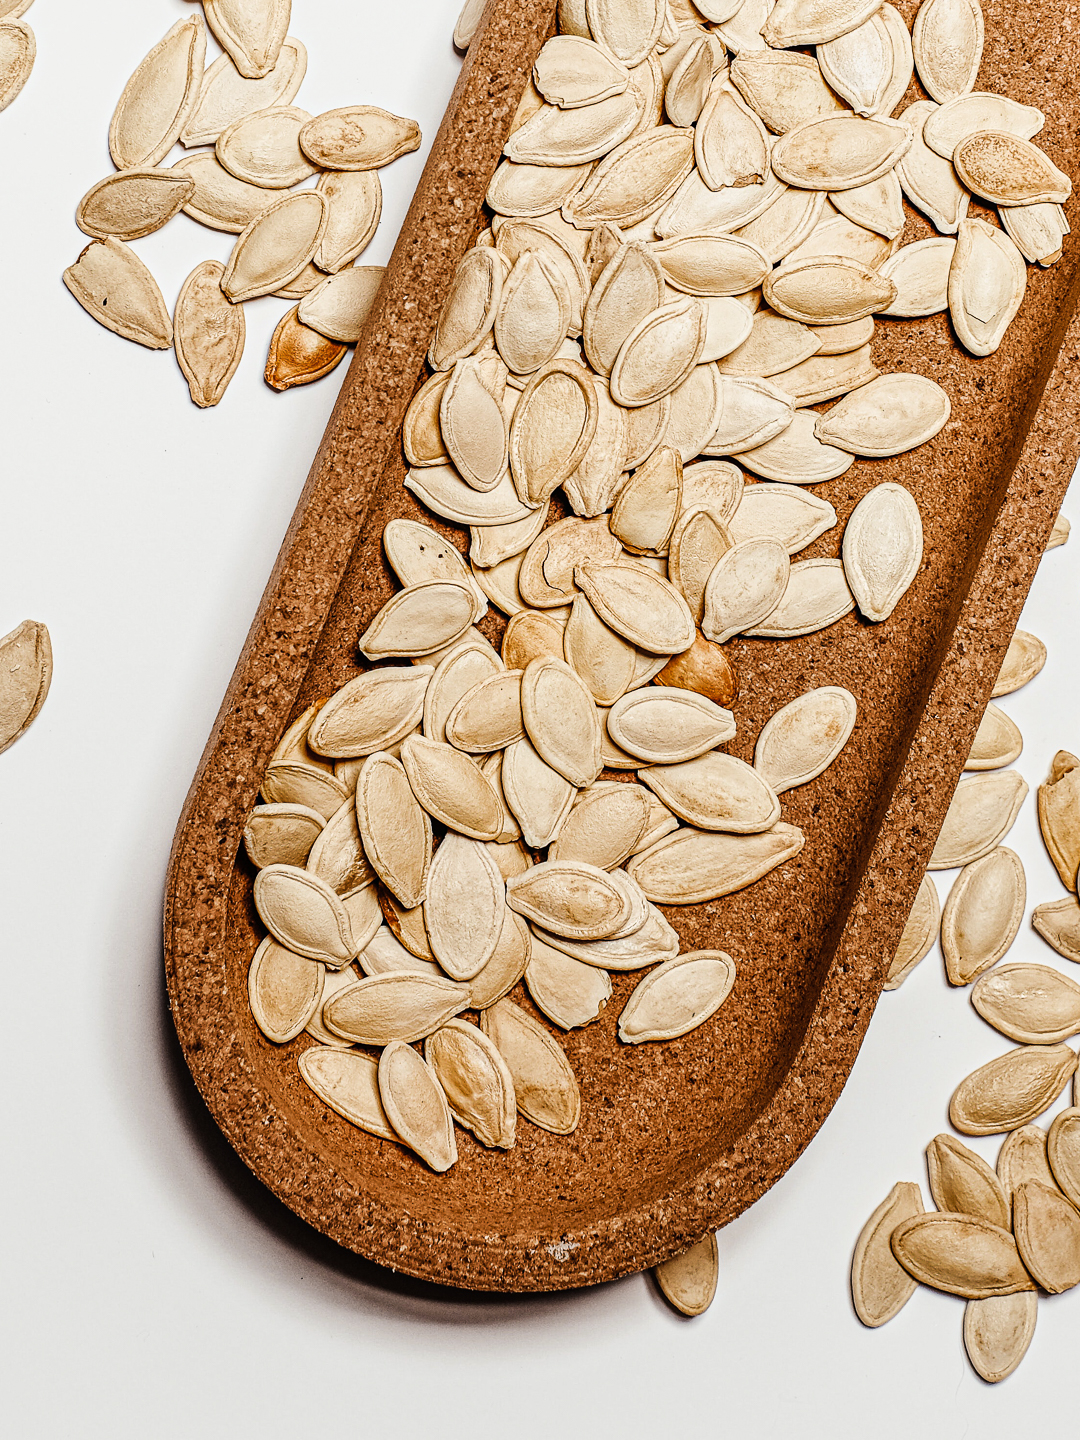 Top 3 High-Protein Seeds to Boost Your Diet